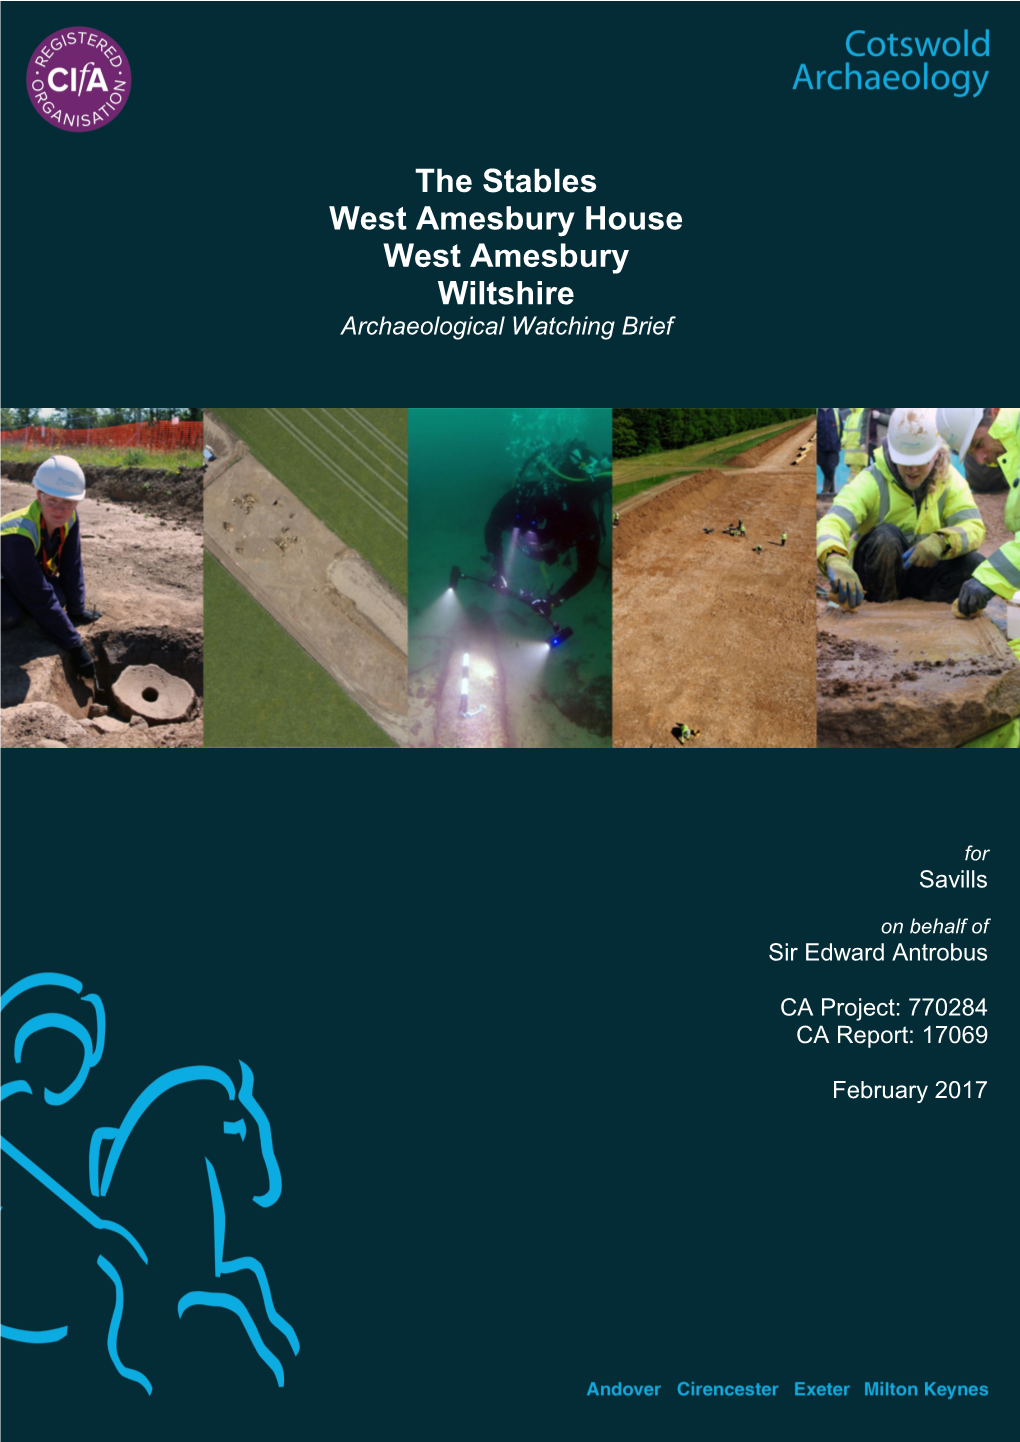 The Stables West Amesbury House West Amesbury Wiltshire Archaeological Watching Brief